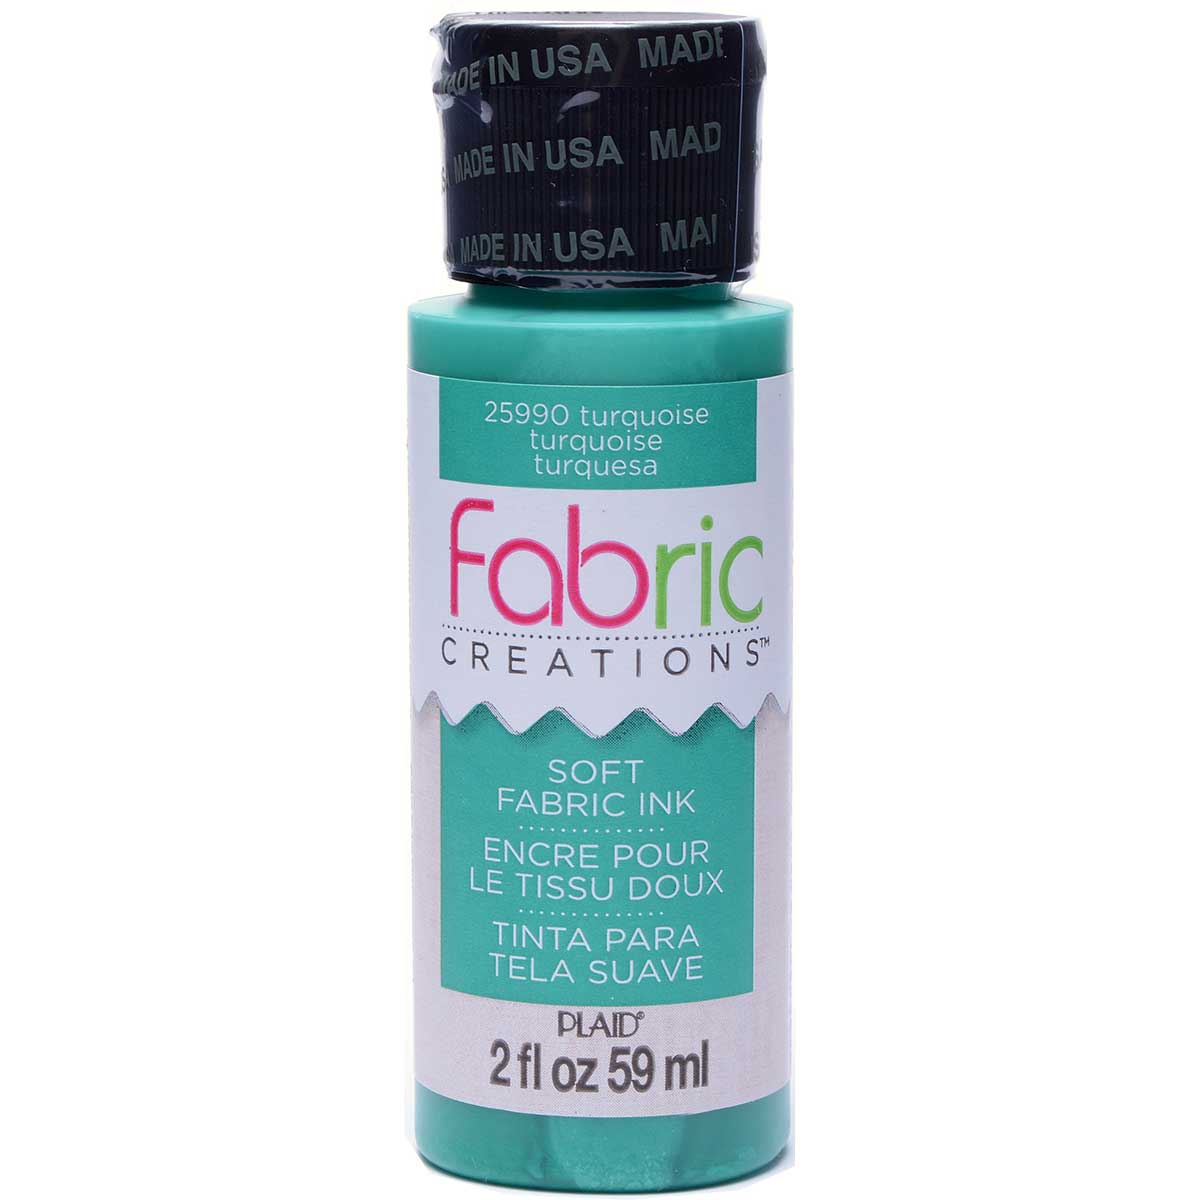 Fabric Creations™ Soft Fabric Inks - Turquoise, 2 oz. - 25990